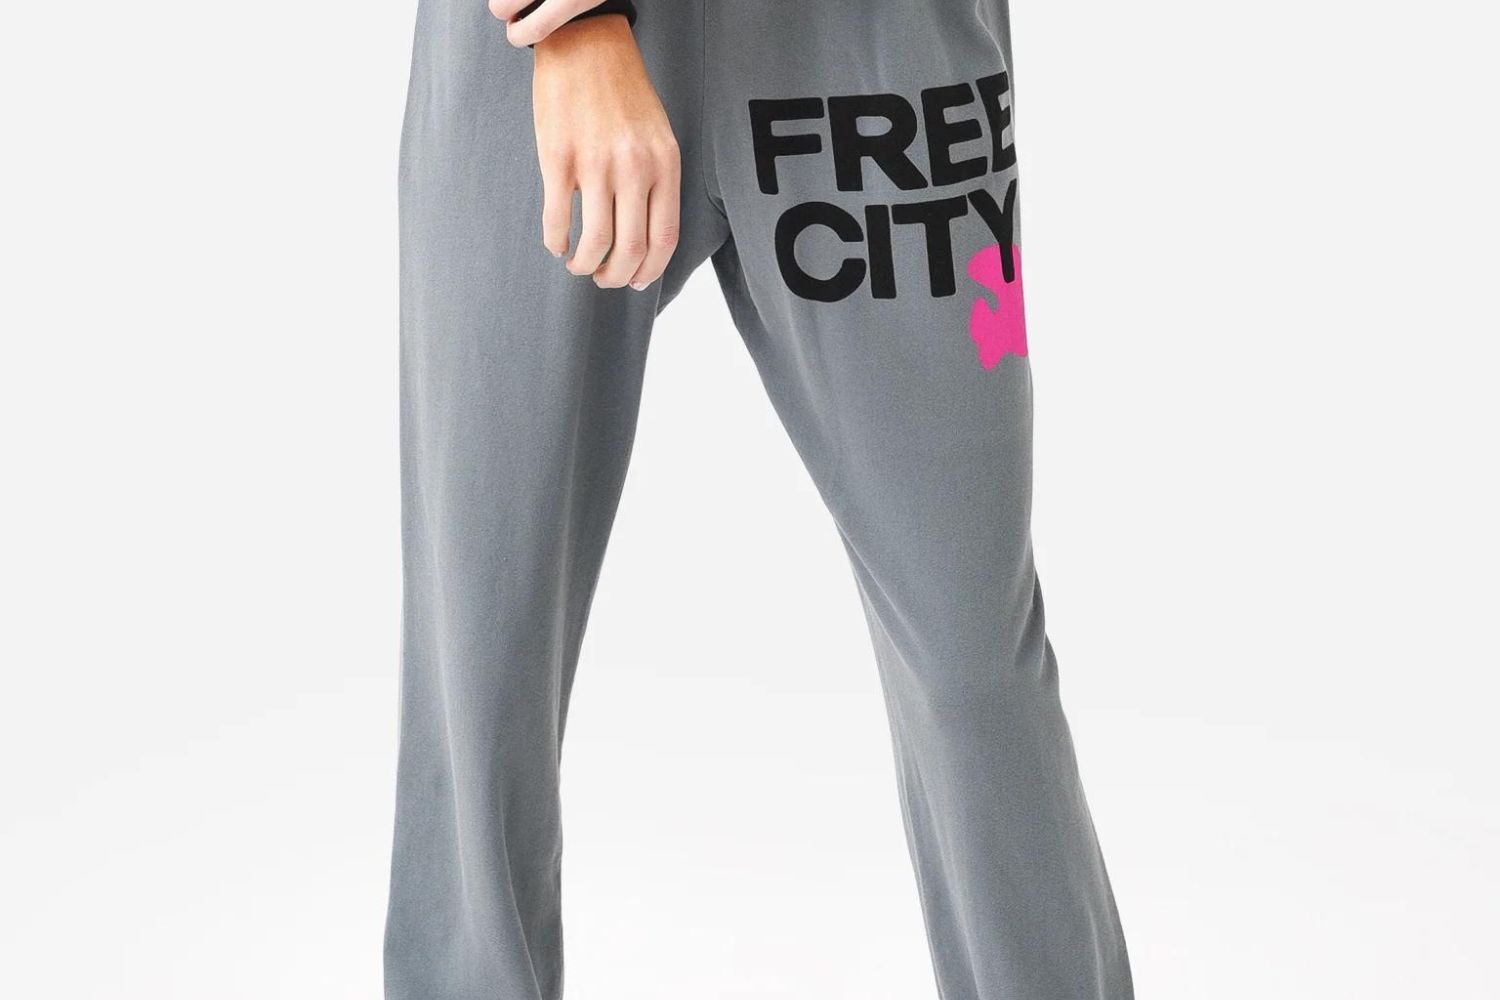 13-extraordinary-facts-about-free-city-sweatpants